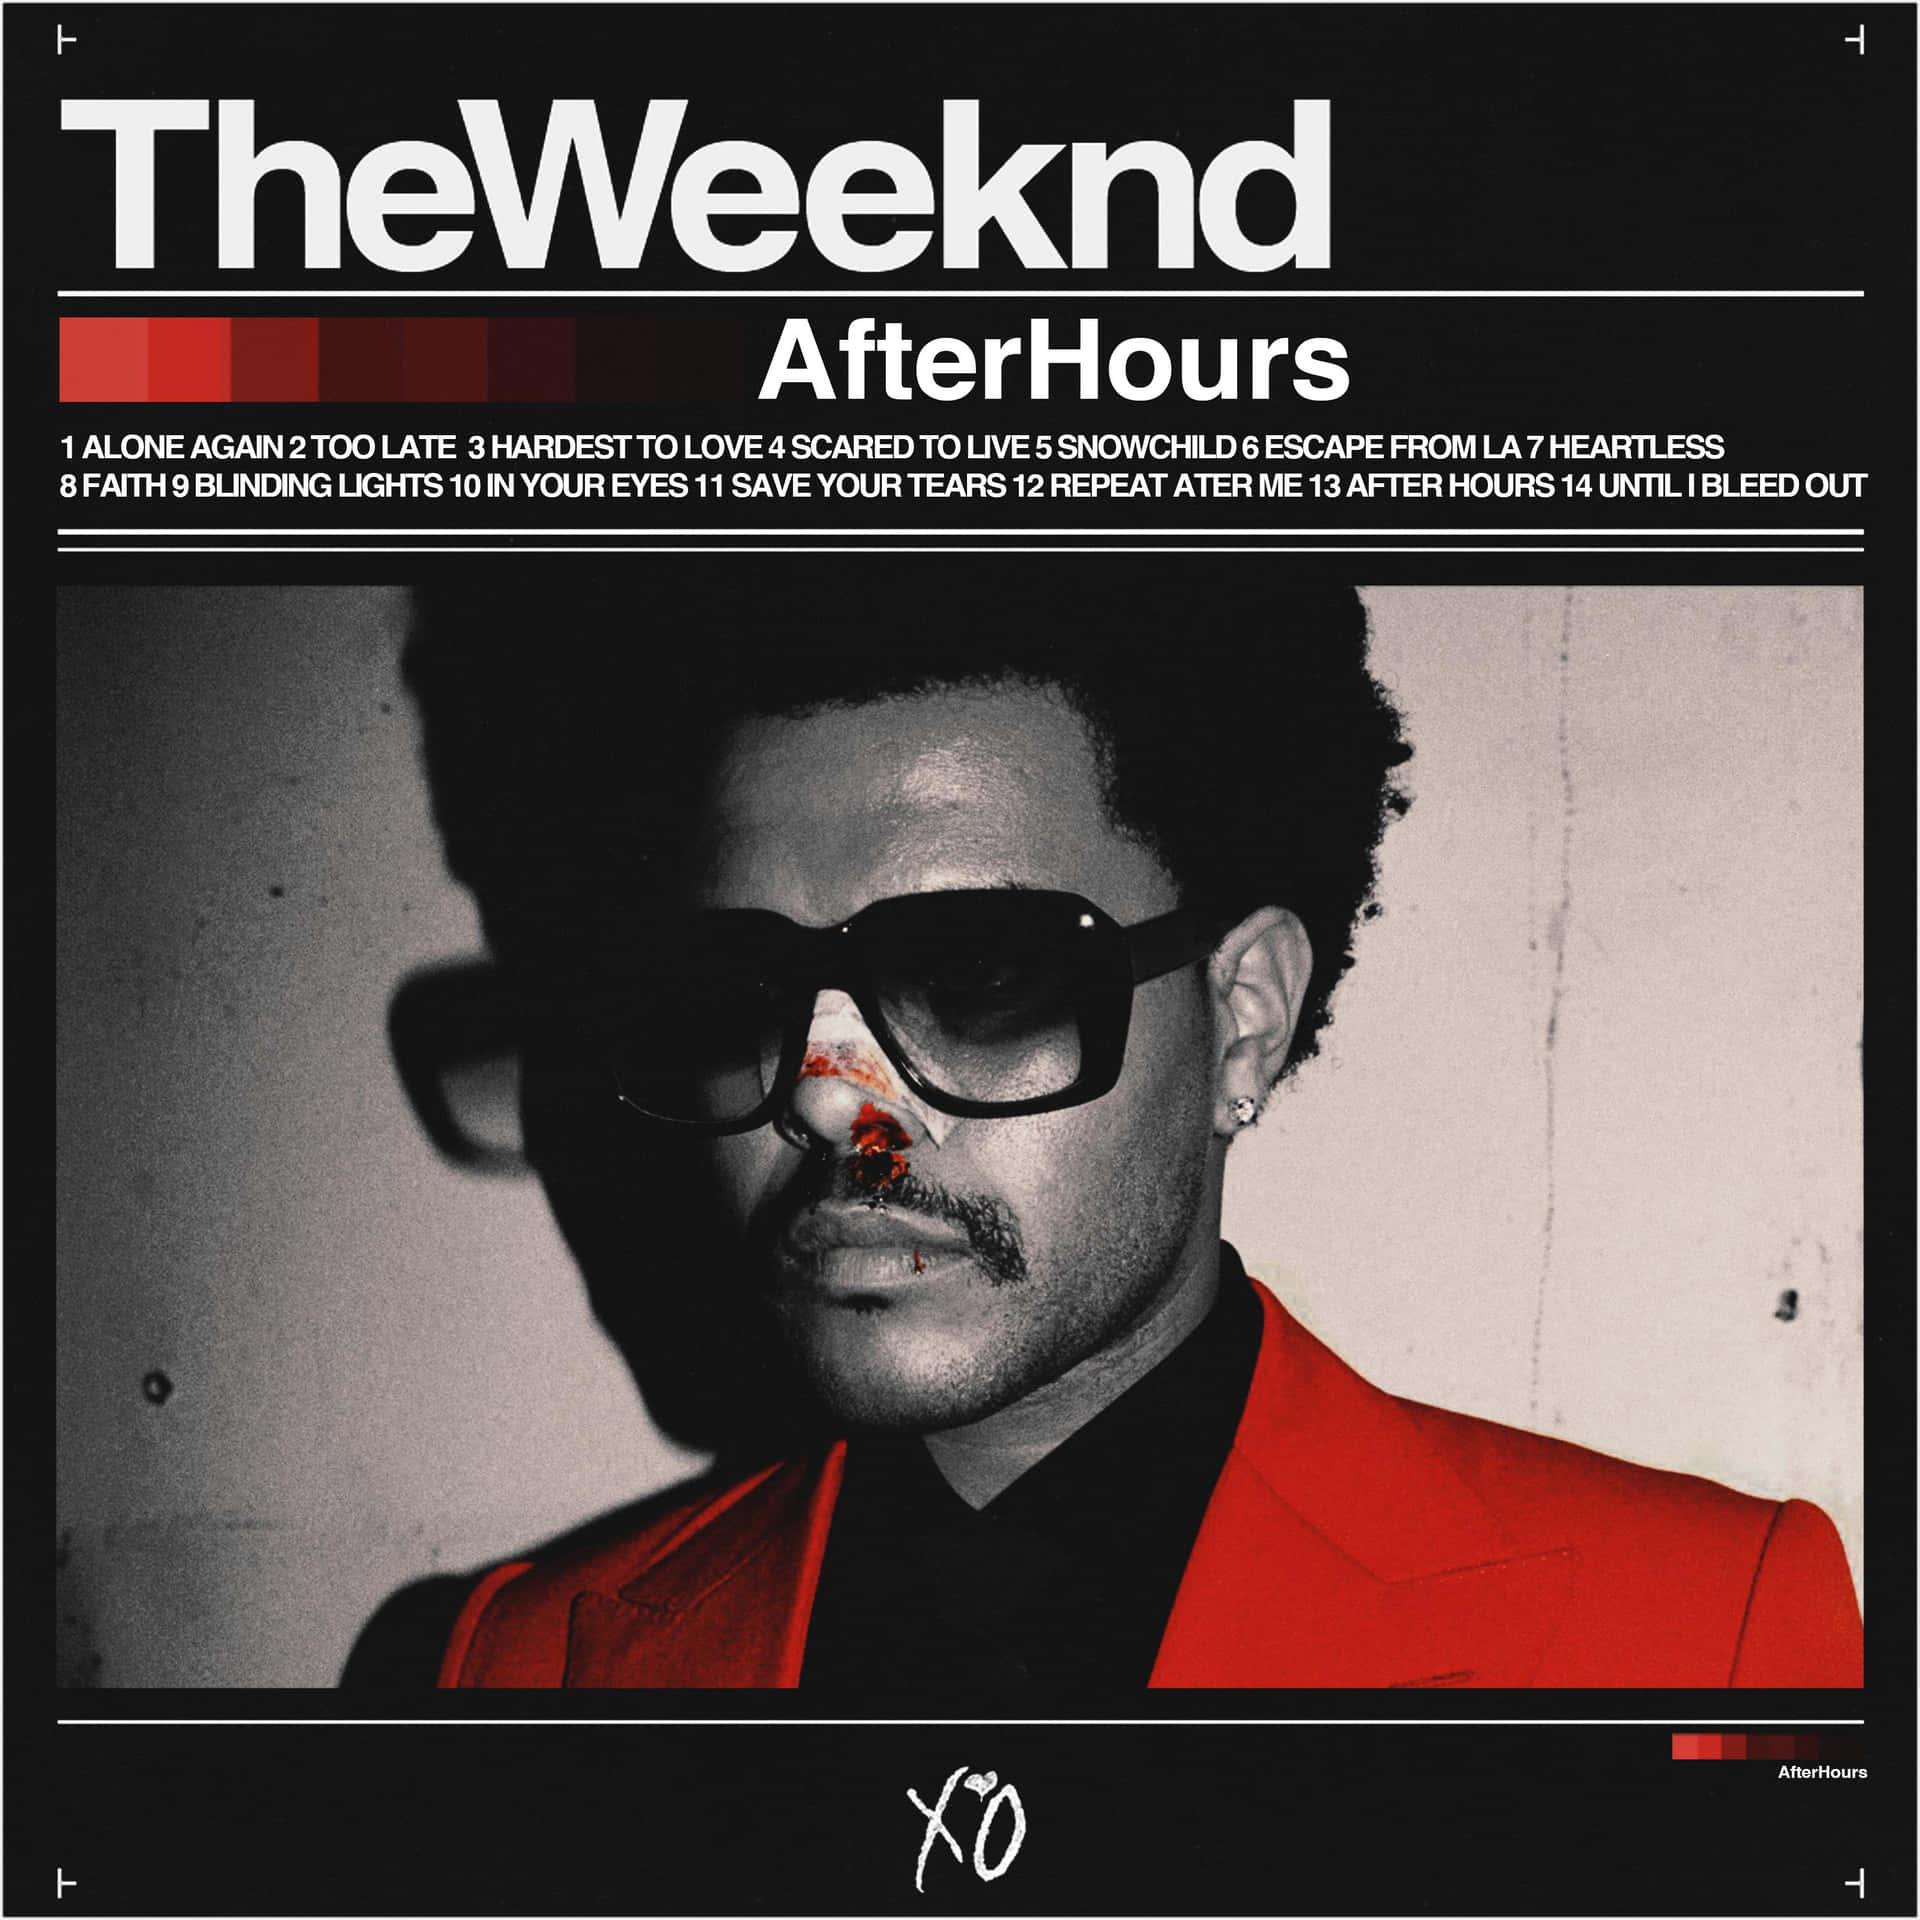 The Weeknd After Hours 002 Poster - US